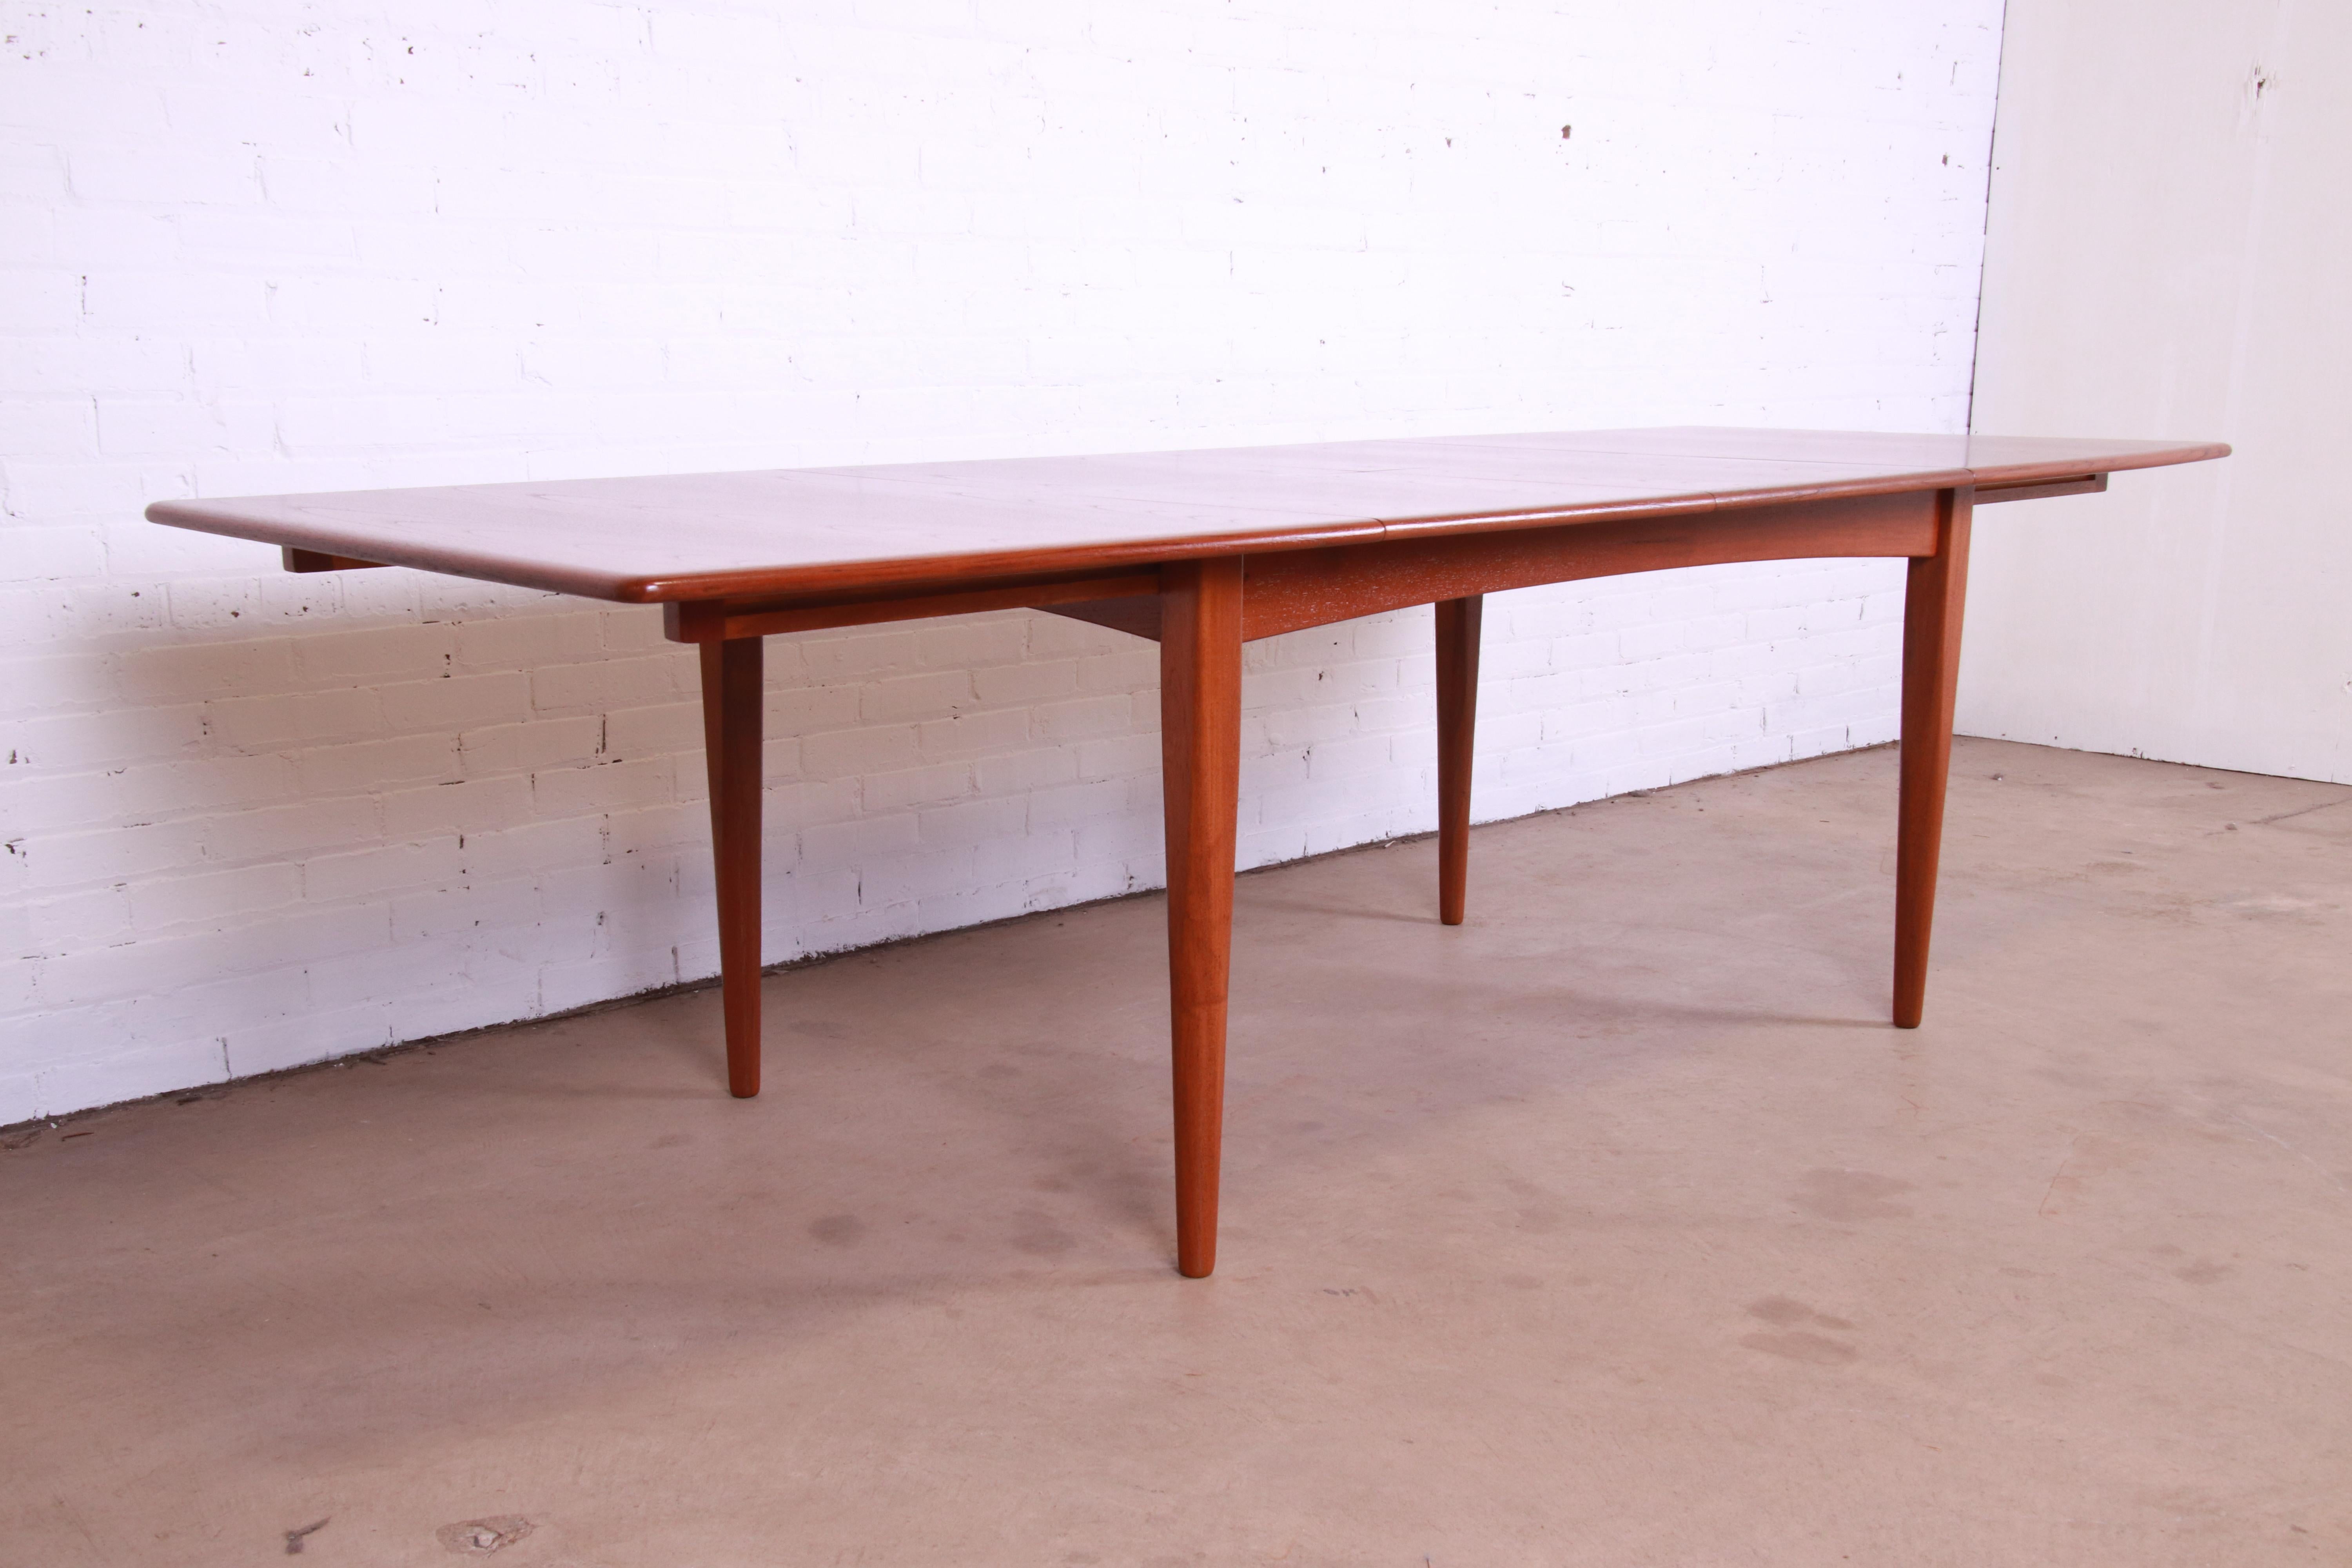 20th Century Falster Danish Modern Teak Boat-Shaped Extension Dining Table, Newly Refinished